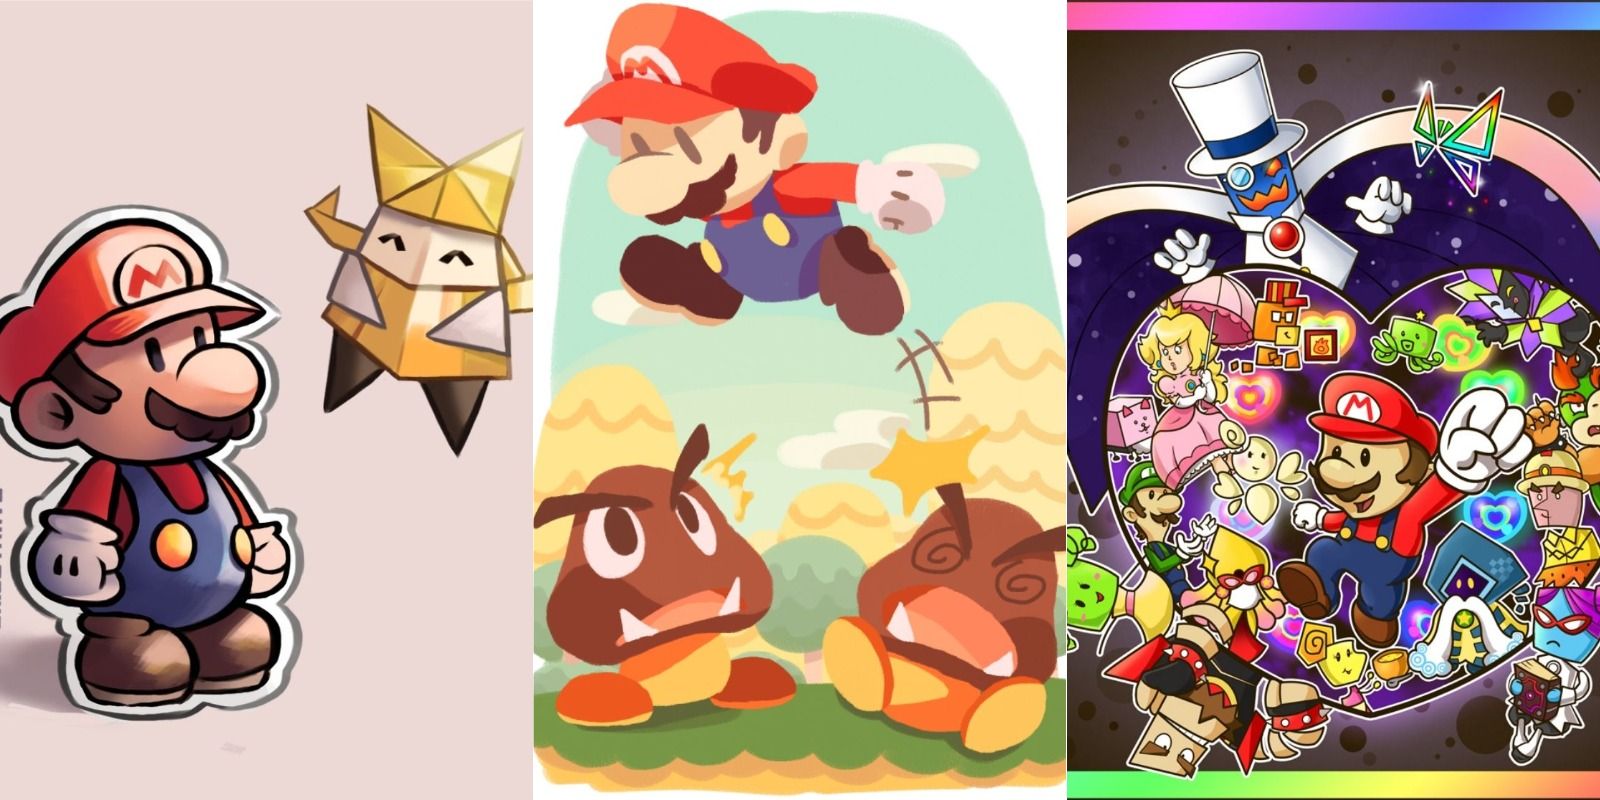 3 pieces of Fan art depicting numerous characters from the Paper Mario series